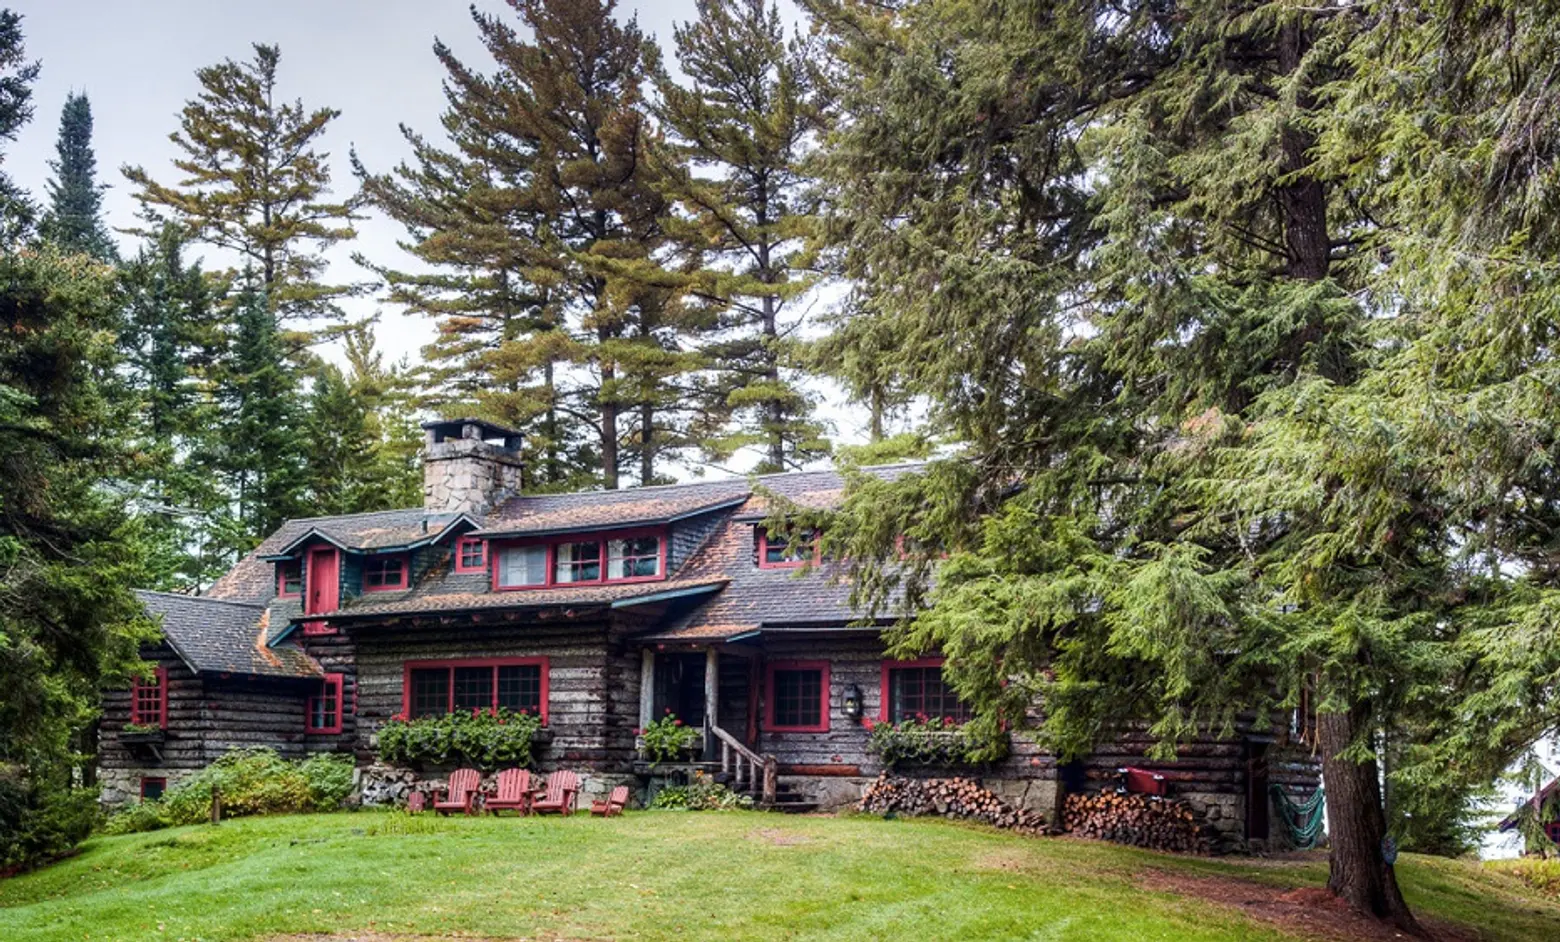 J.P. Morgan’s 120-Year-Old ‘Great Camp Uncas’ in the Adirondacks Can Be Yours for $3.25M